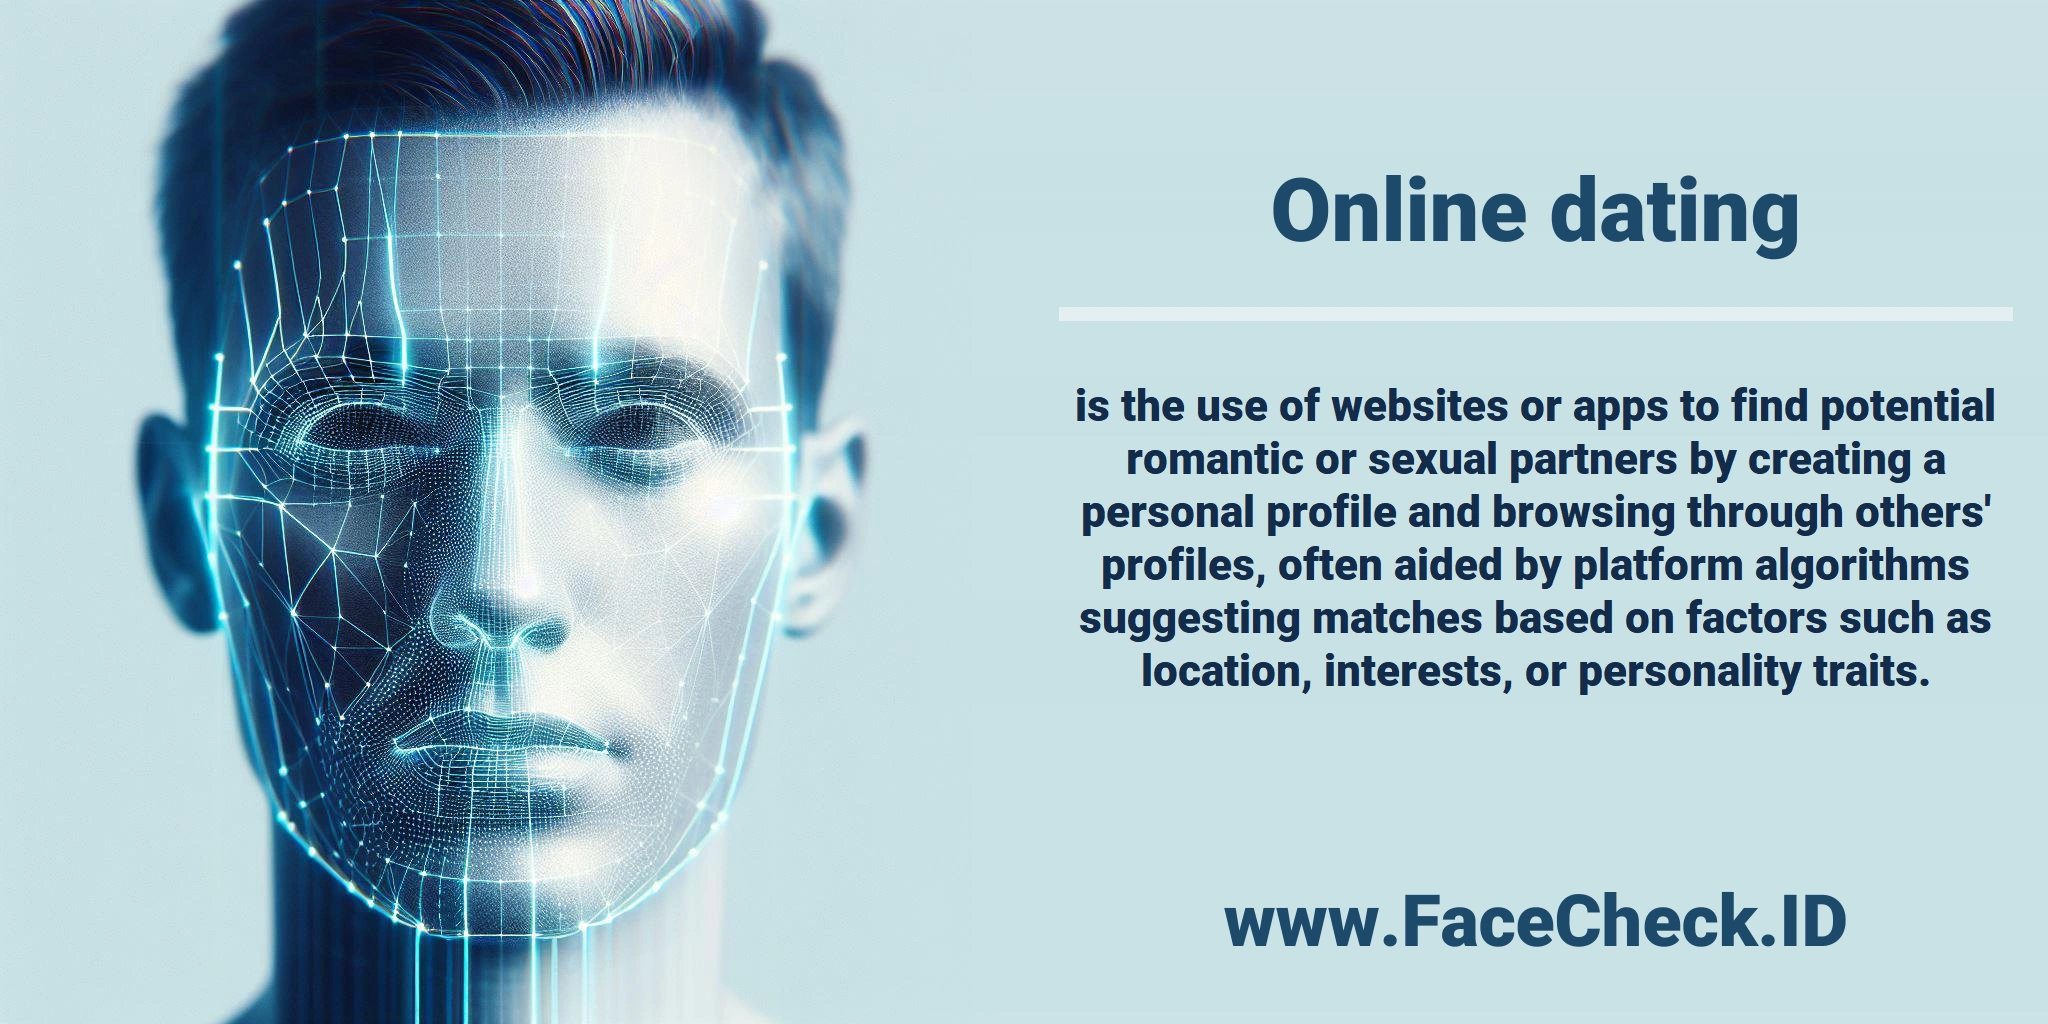 <b>Online dating</b> is the use of websites or apps to find potential romantic or sexual partners by creating a personal profile and browsing through others' profiles, often aided by platform algorithms suggesting matches based on factors such as location, interests, or personality traits.